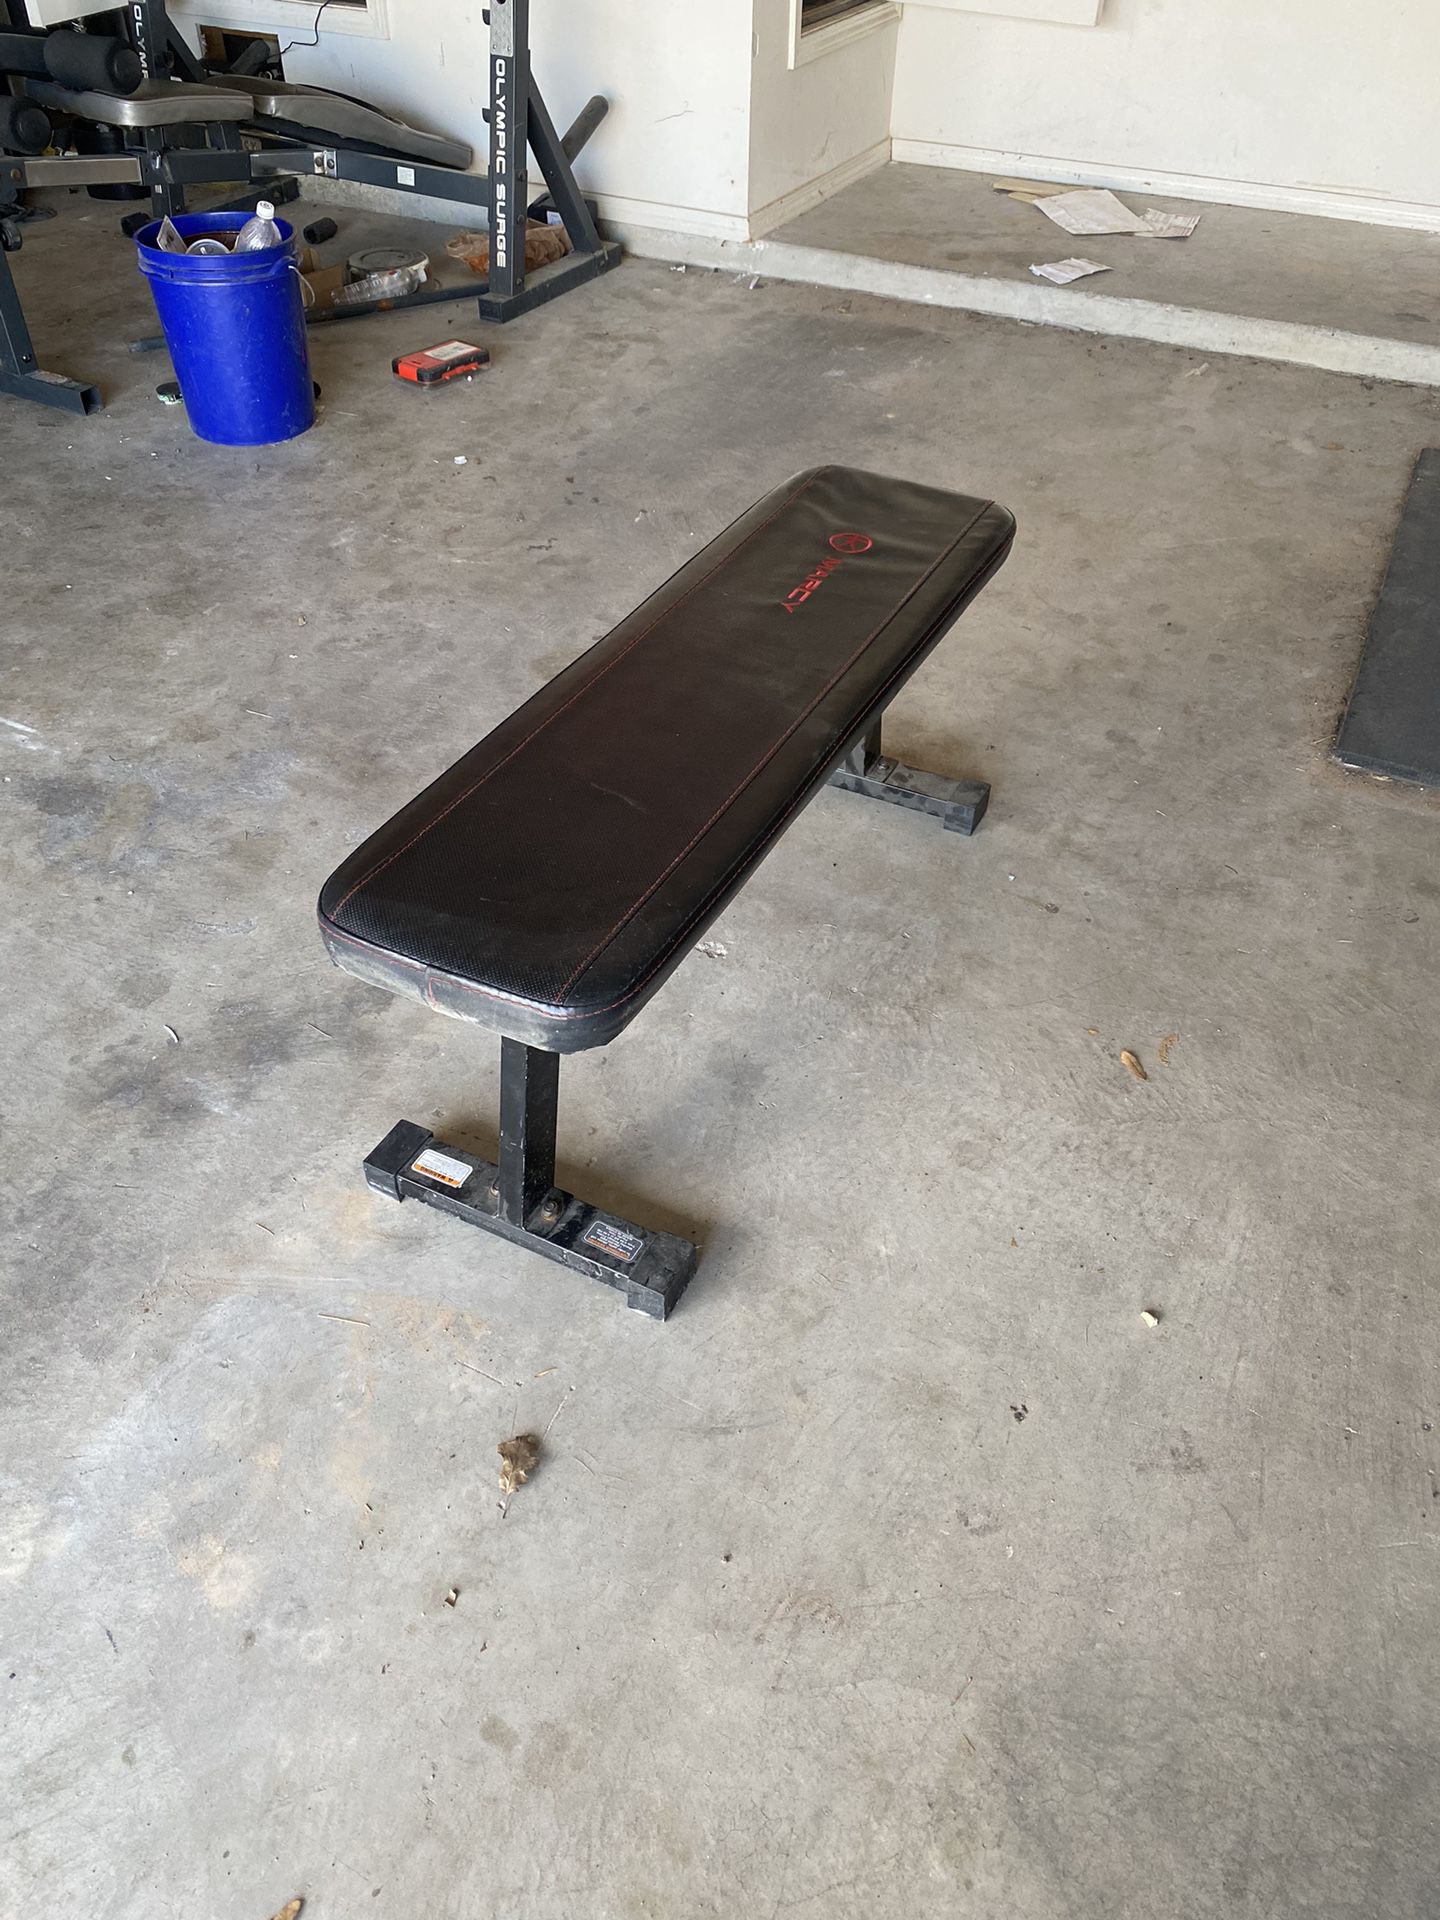 Marcy Utility Flat Weight Bench